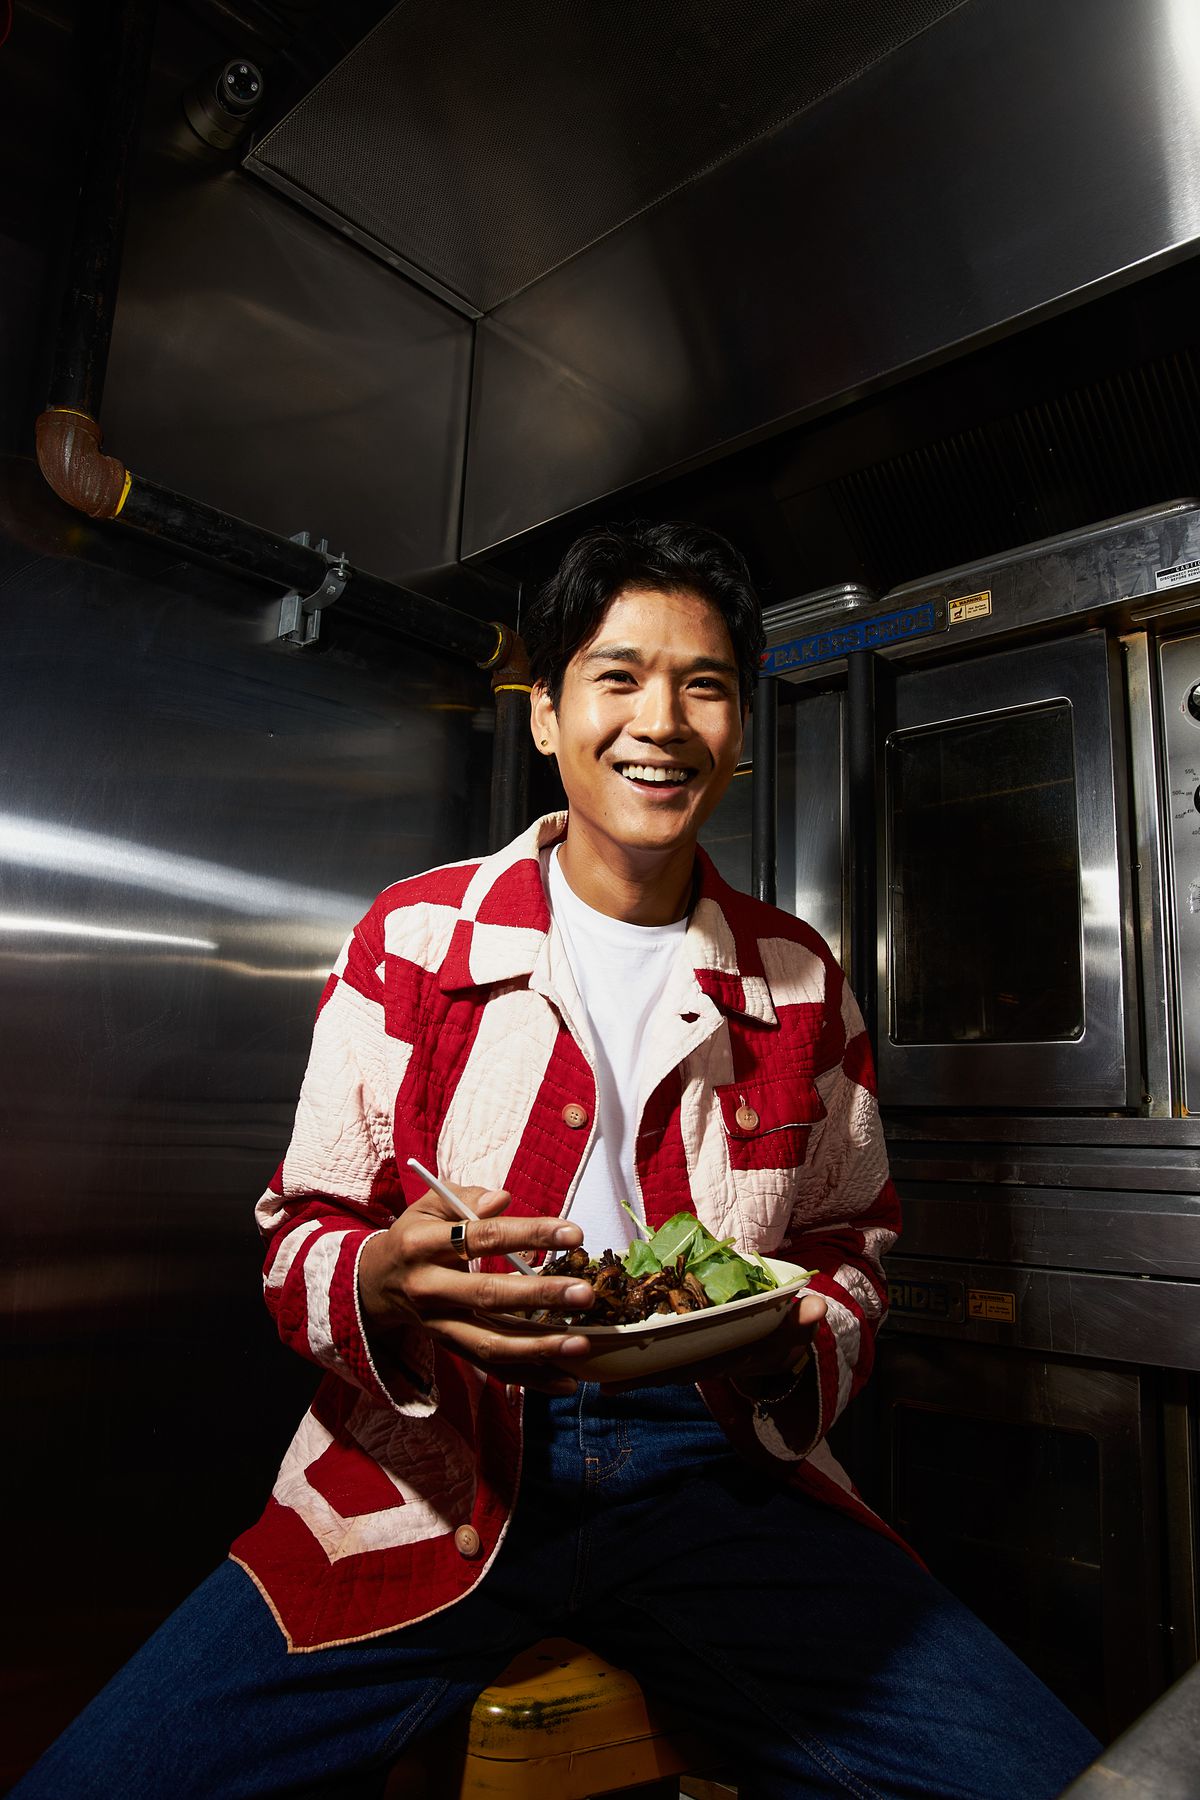 Vlady Rice, a Filipino chef known for his Waldy Cousin pop-up in New York City, stands in an industrial kitchen dressed in red and white.